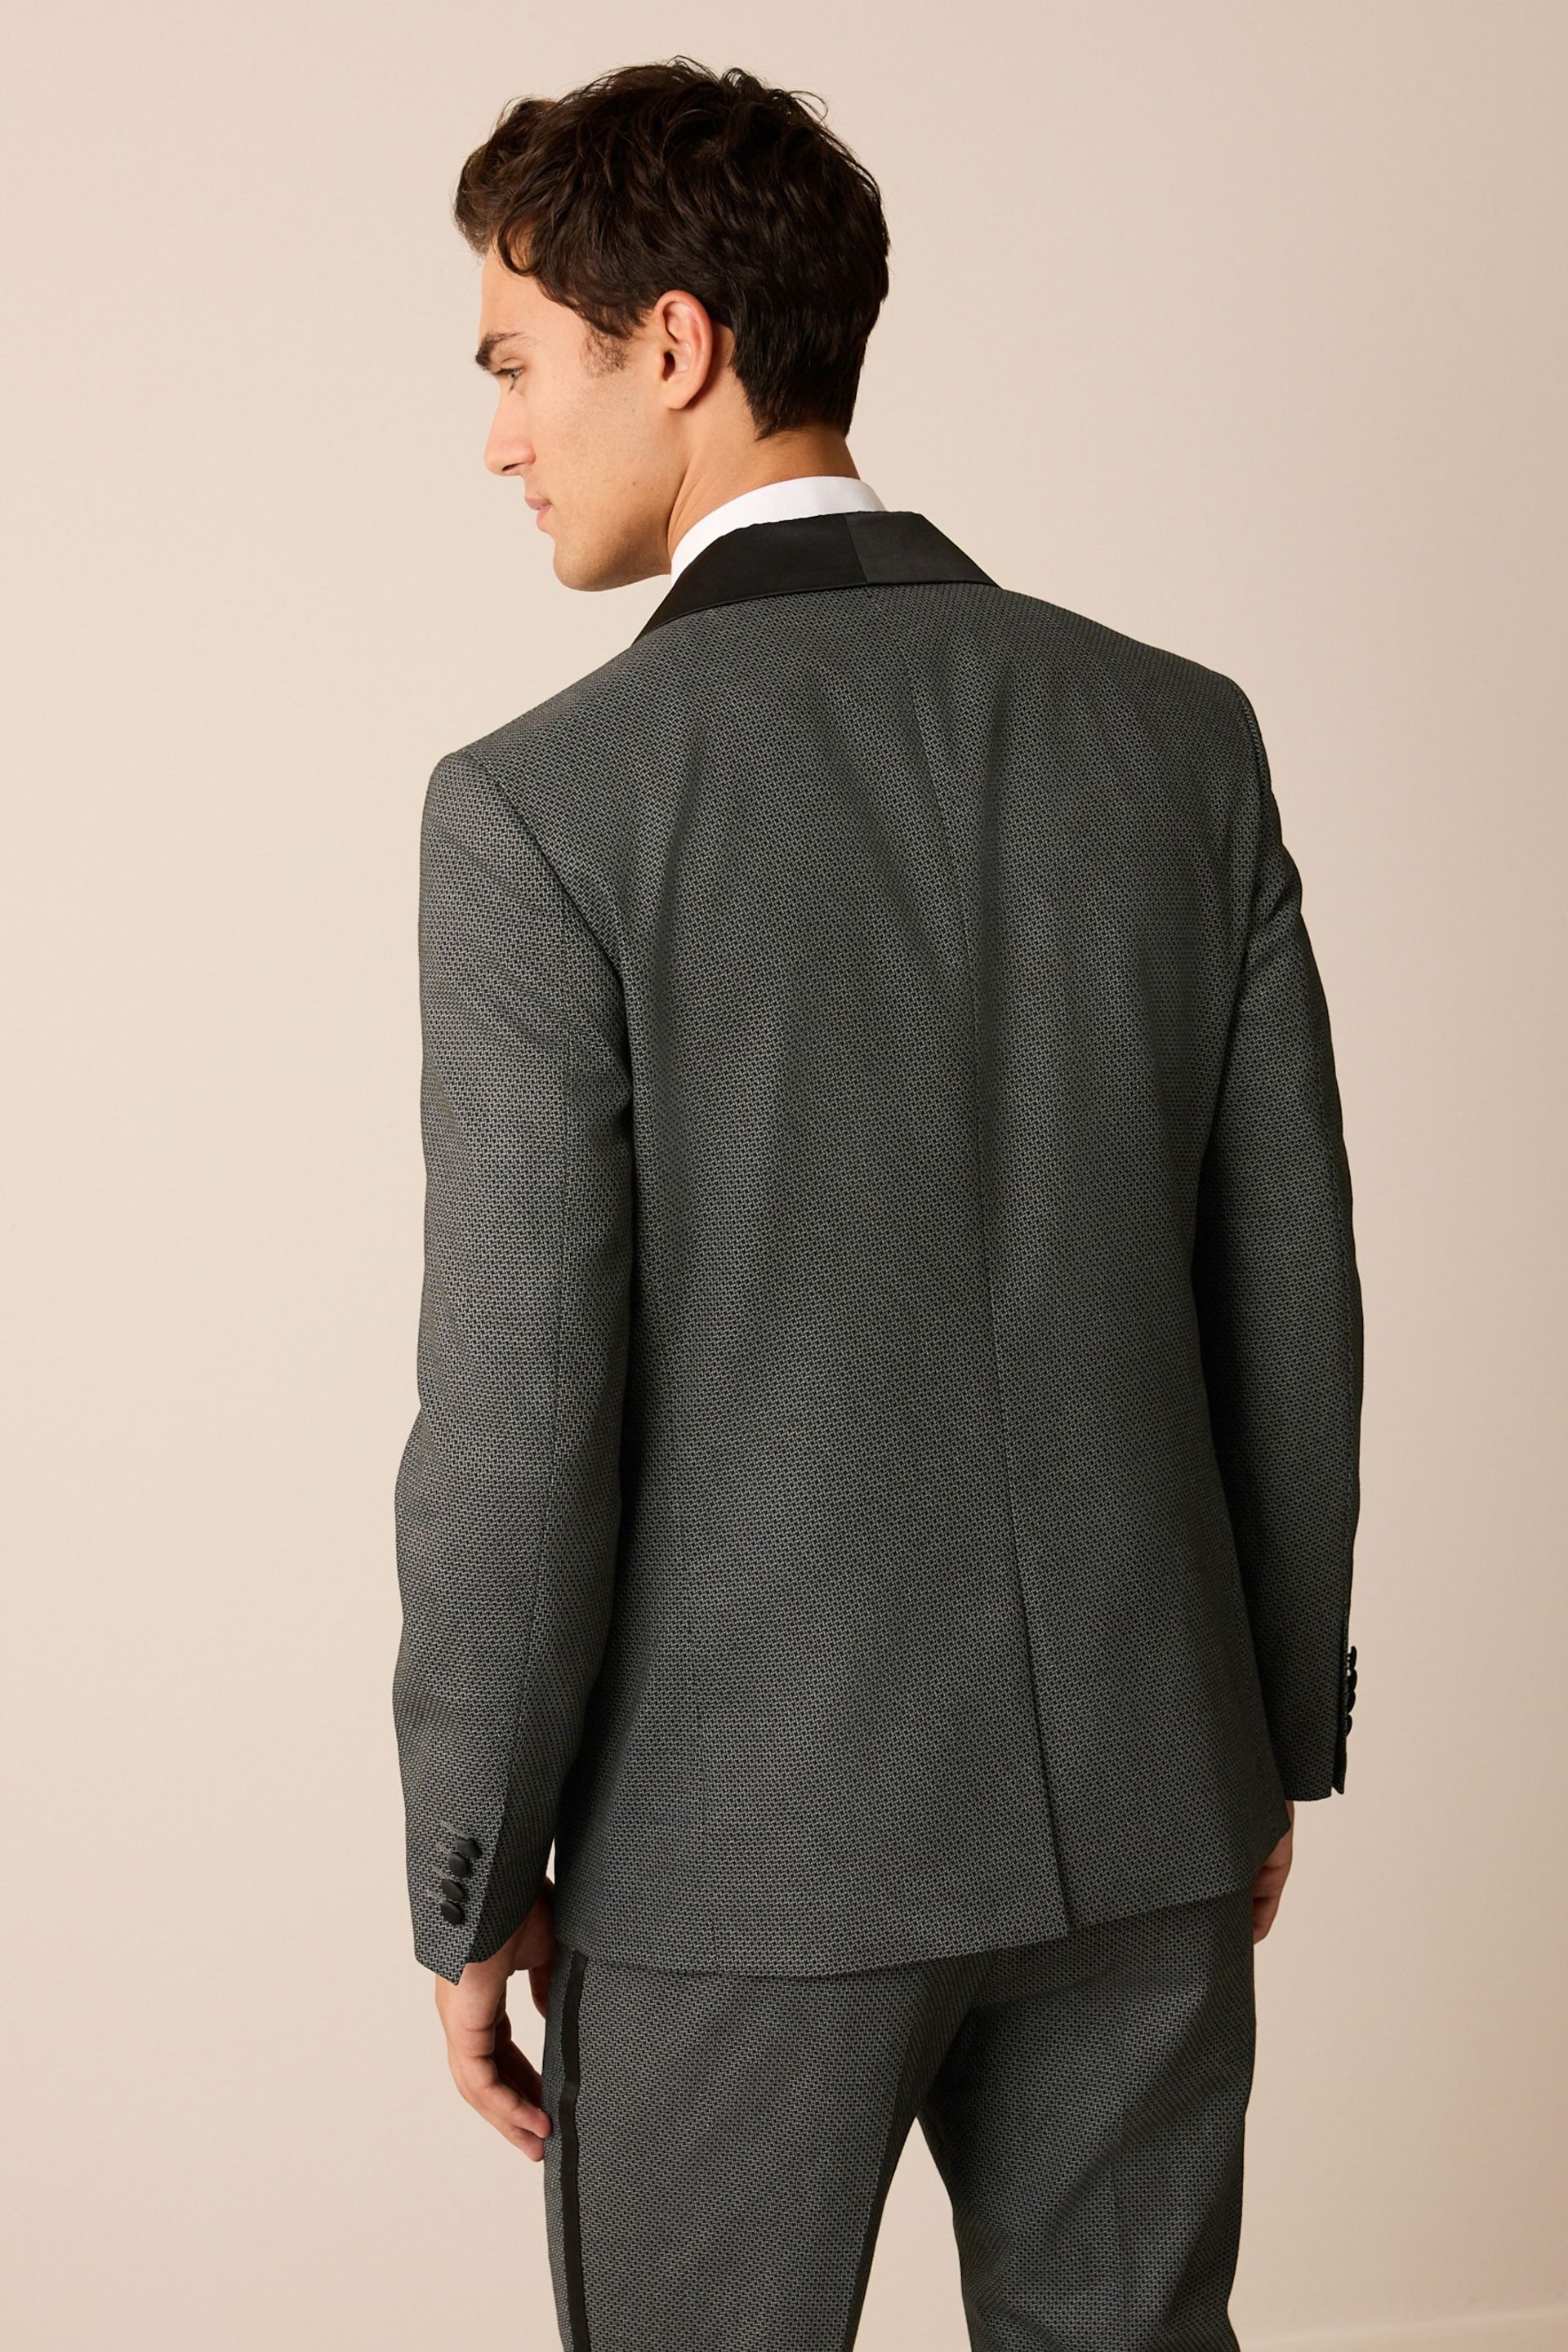 Charcoal Grey Tailored Textured Tuxedo Suit Jacket - Image 3 of 13